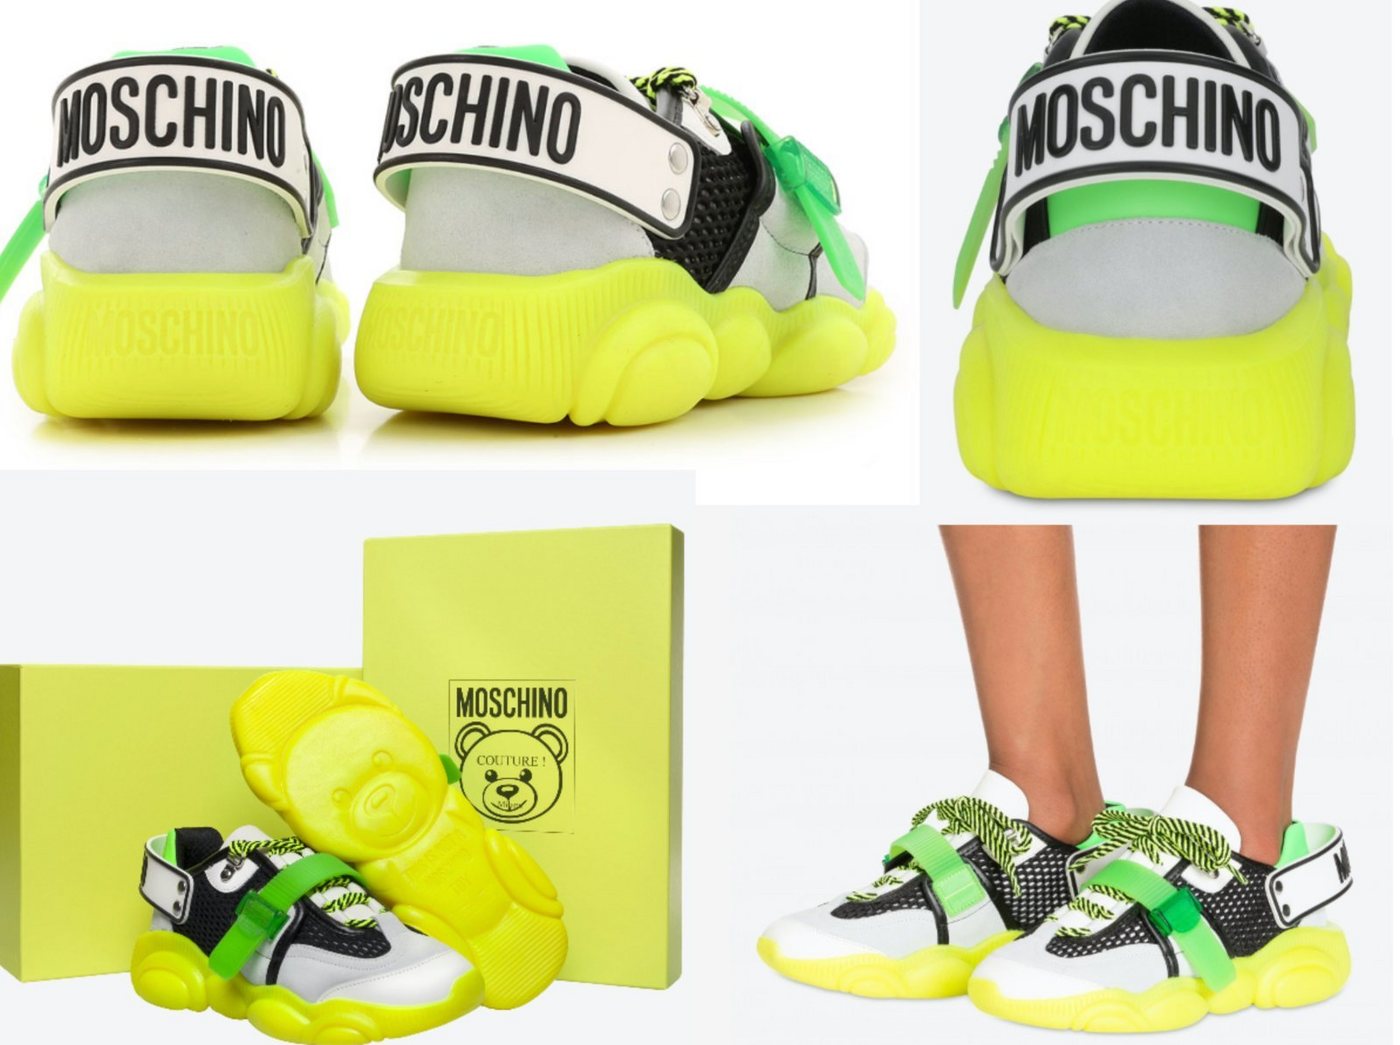 Moschino MOSCHINO COUTURE Special Teddy Shoes Fluo Sneakers Trainers Schuhe Tur Sneaker von Moschino